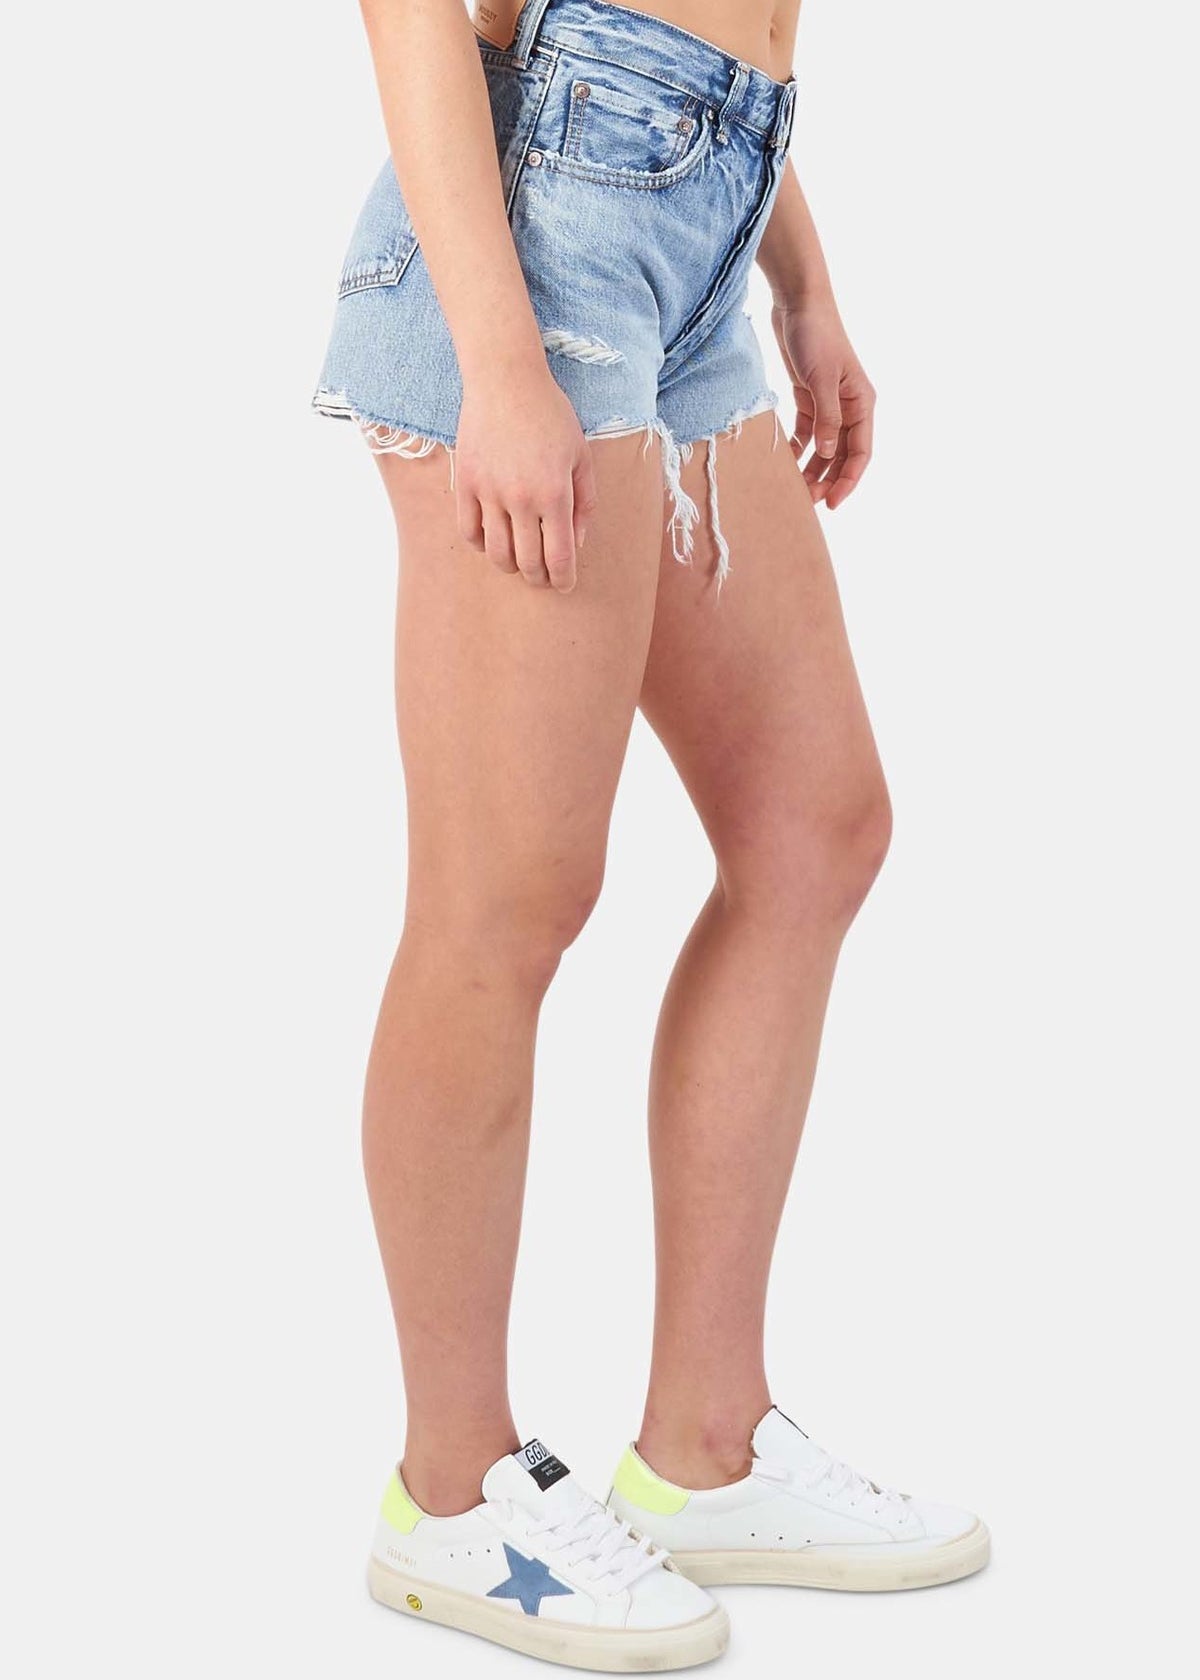 Women-s-Moussy-Vintage-Shirley-Shorts-in-Light-Blue--Size-23-20210518070416.jpg